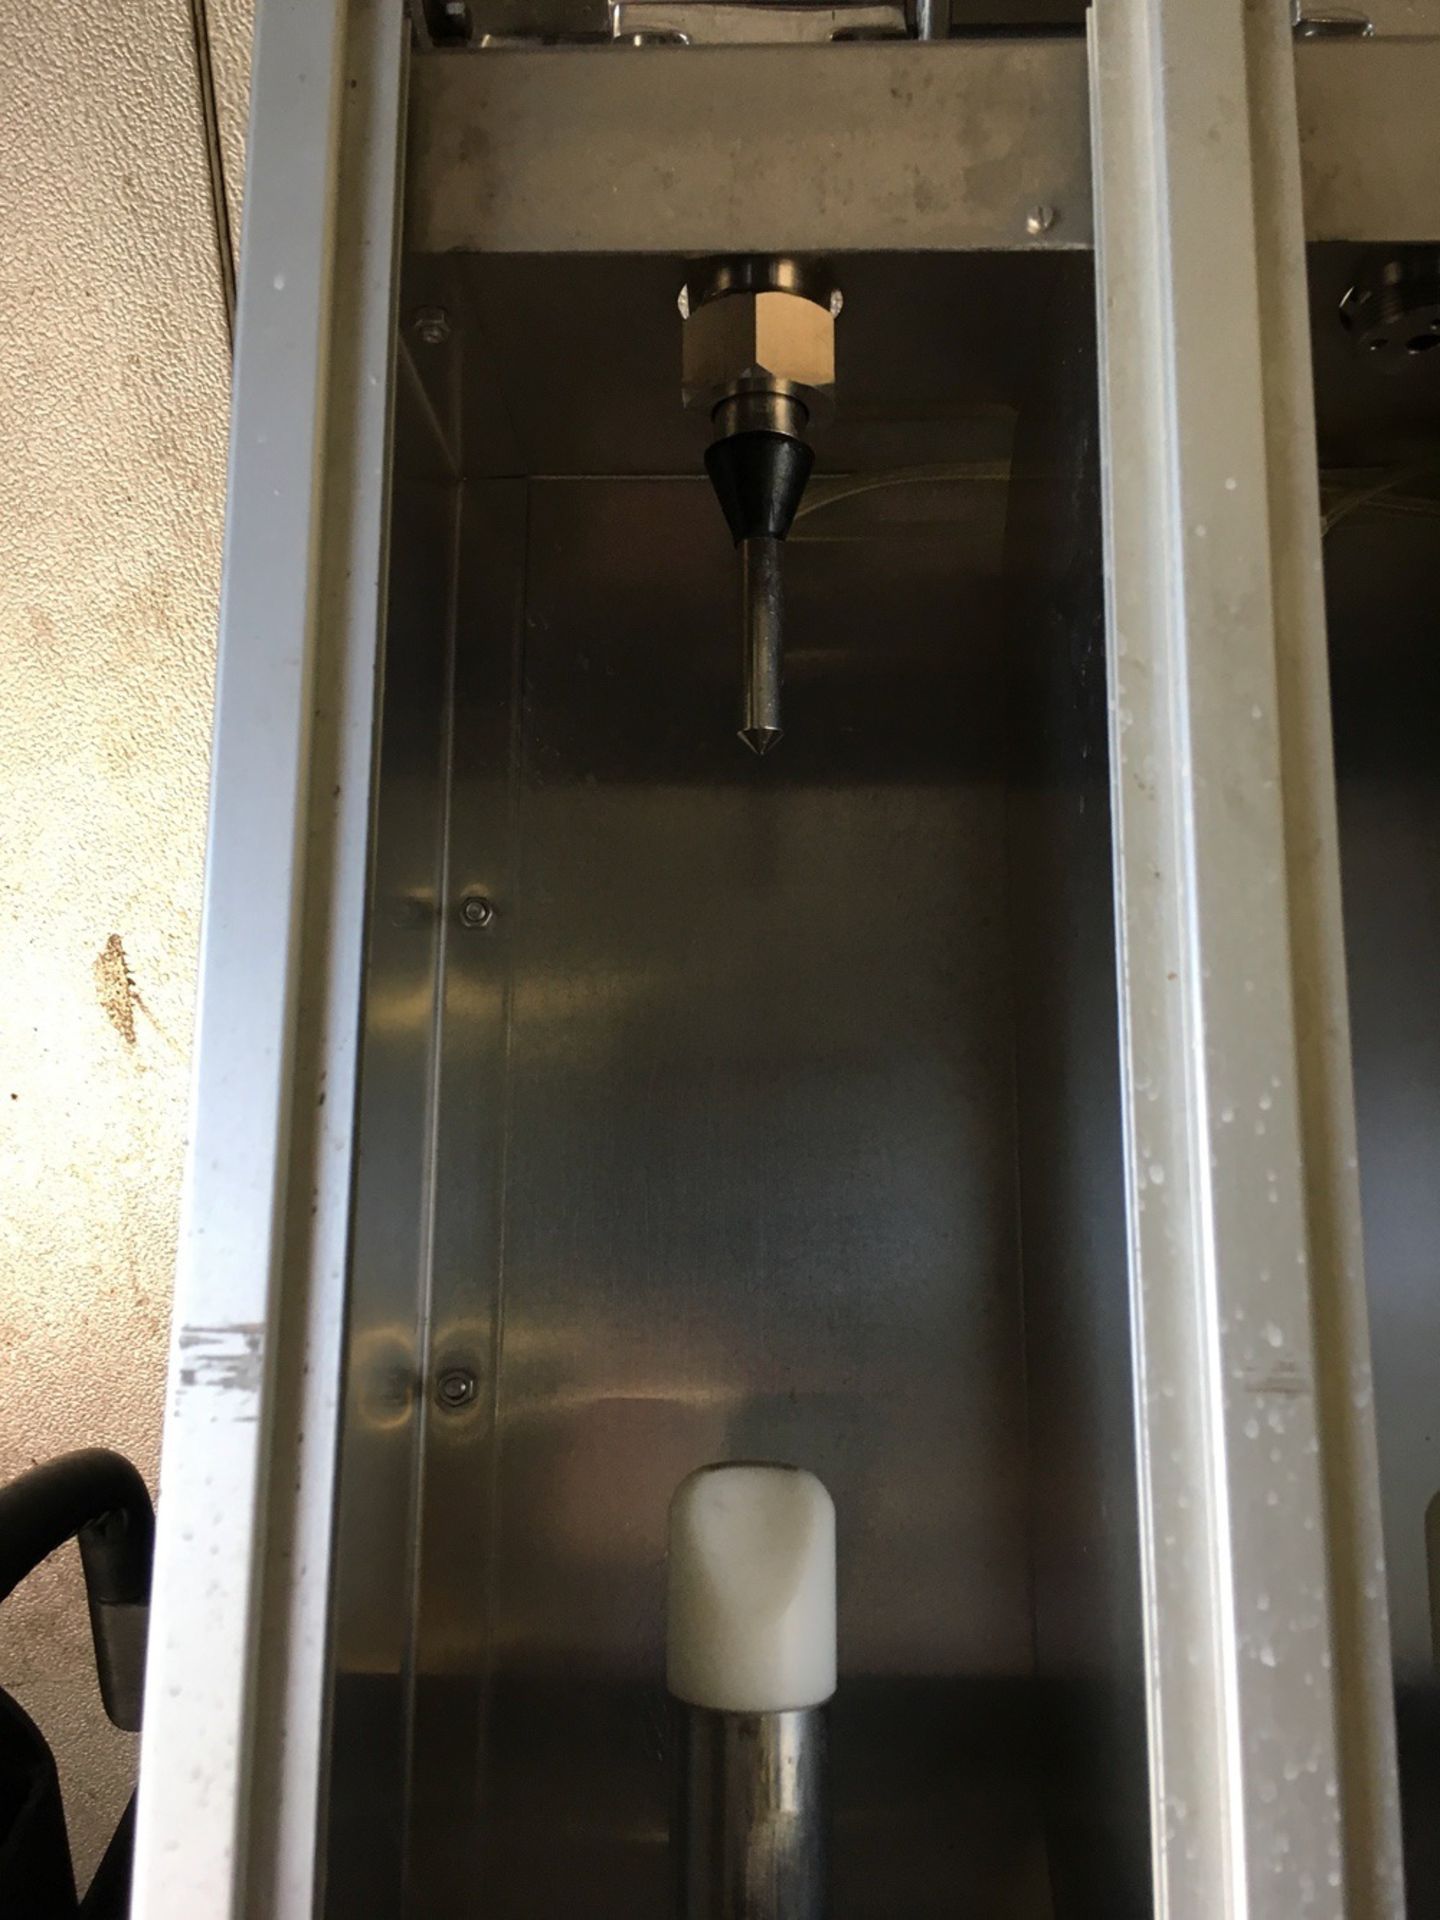 GW Kent 4-Spout Sparkling Filling Machine, 304 Stainless Steel for Champagne, Beer | Rig Fee: $75 - Image 2 of 3